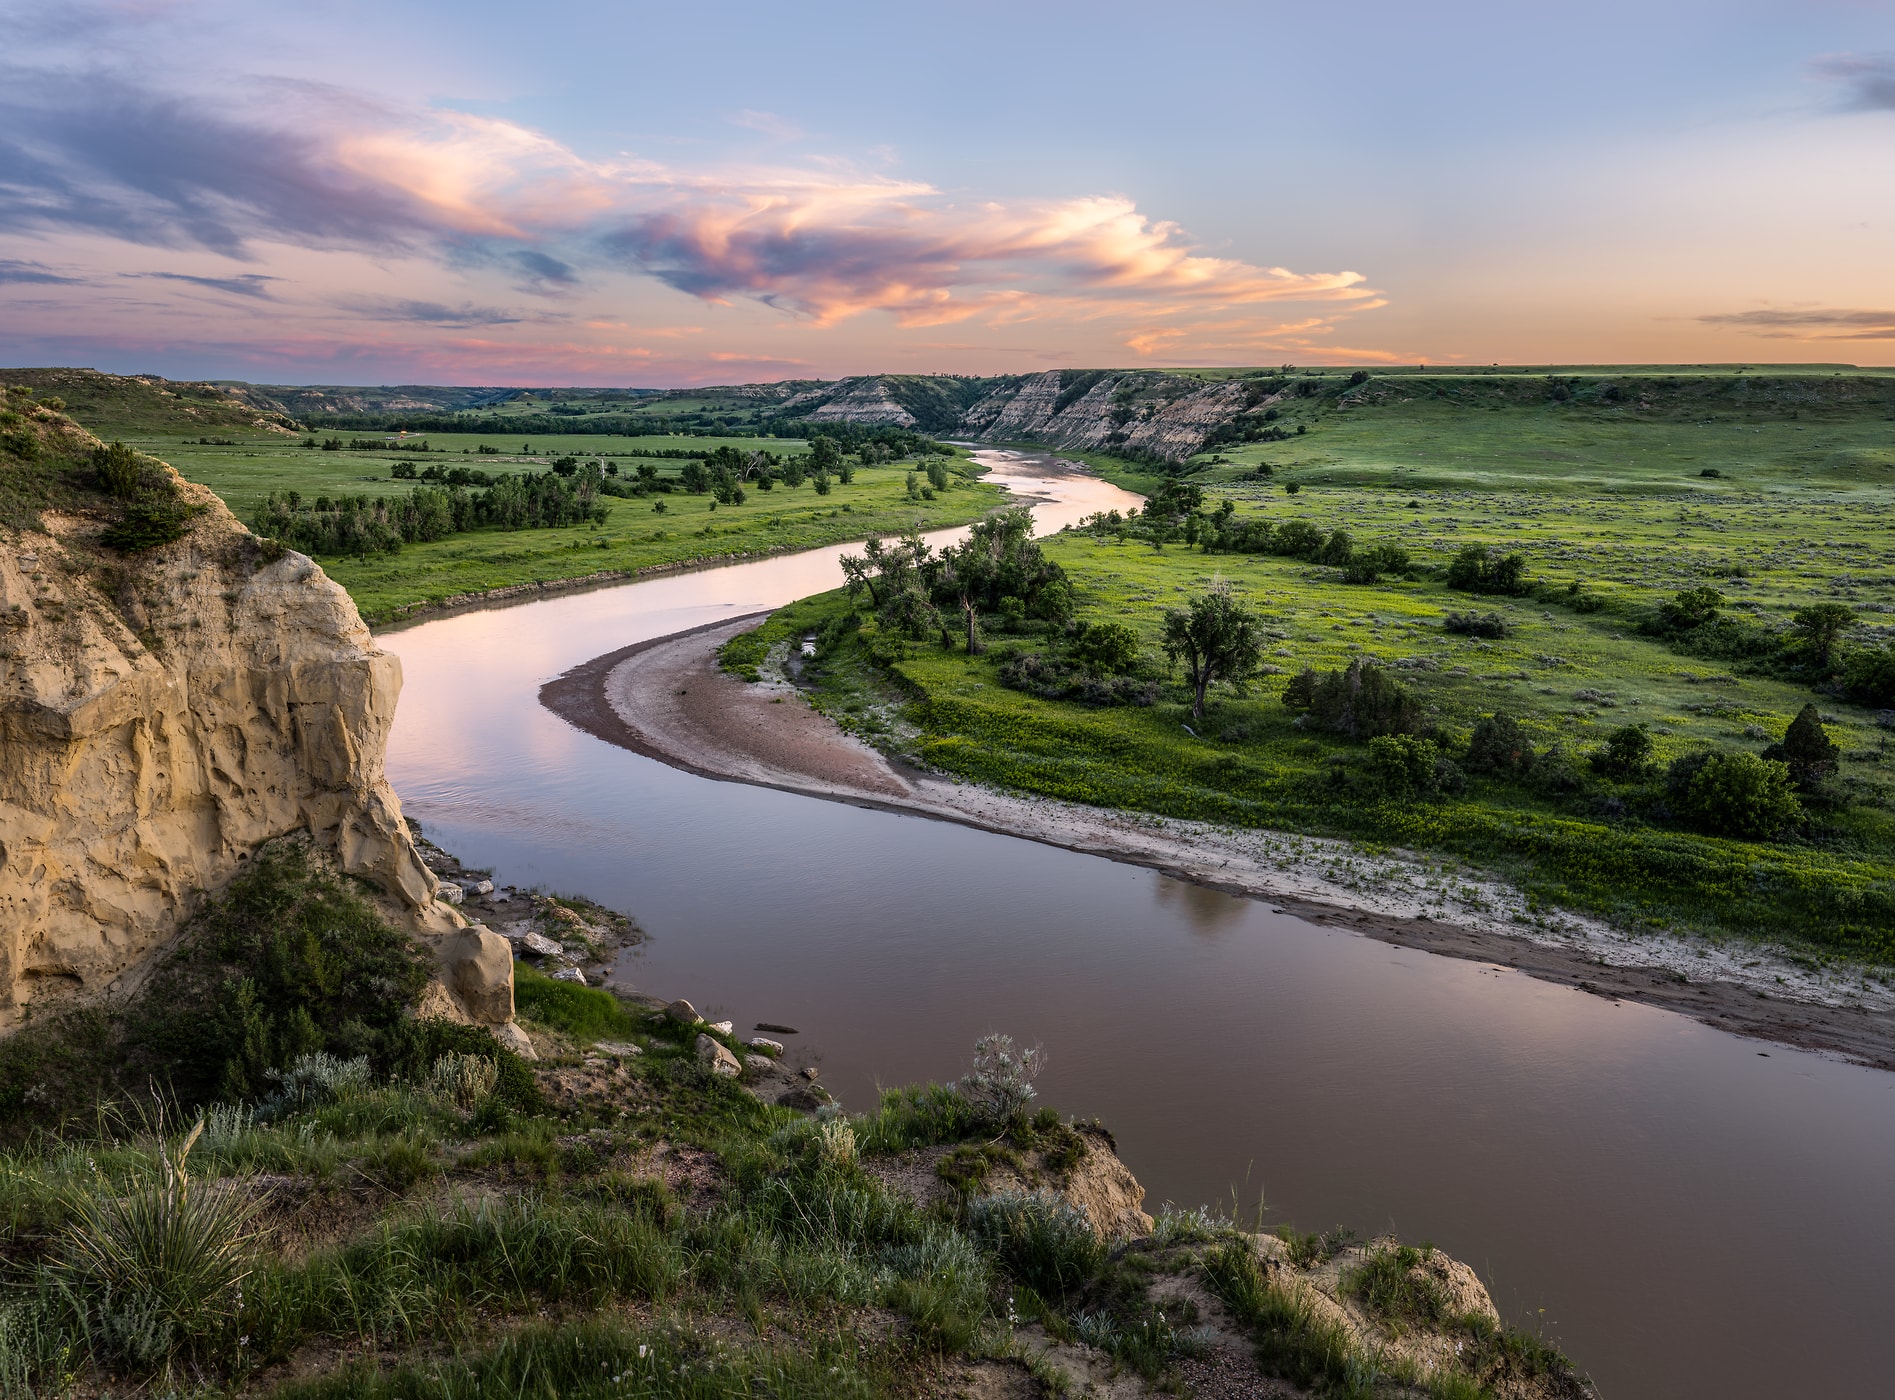 531 megapixels! A very high resolution, large-format VAST photo print of a peaceful river at sunset; landscape photograph of the Little Missouri River created by Chris Blake in Theodore Roosevelt National Park, North Dakota.